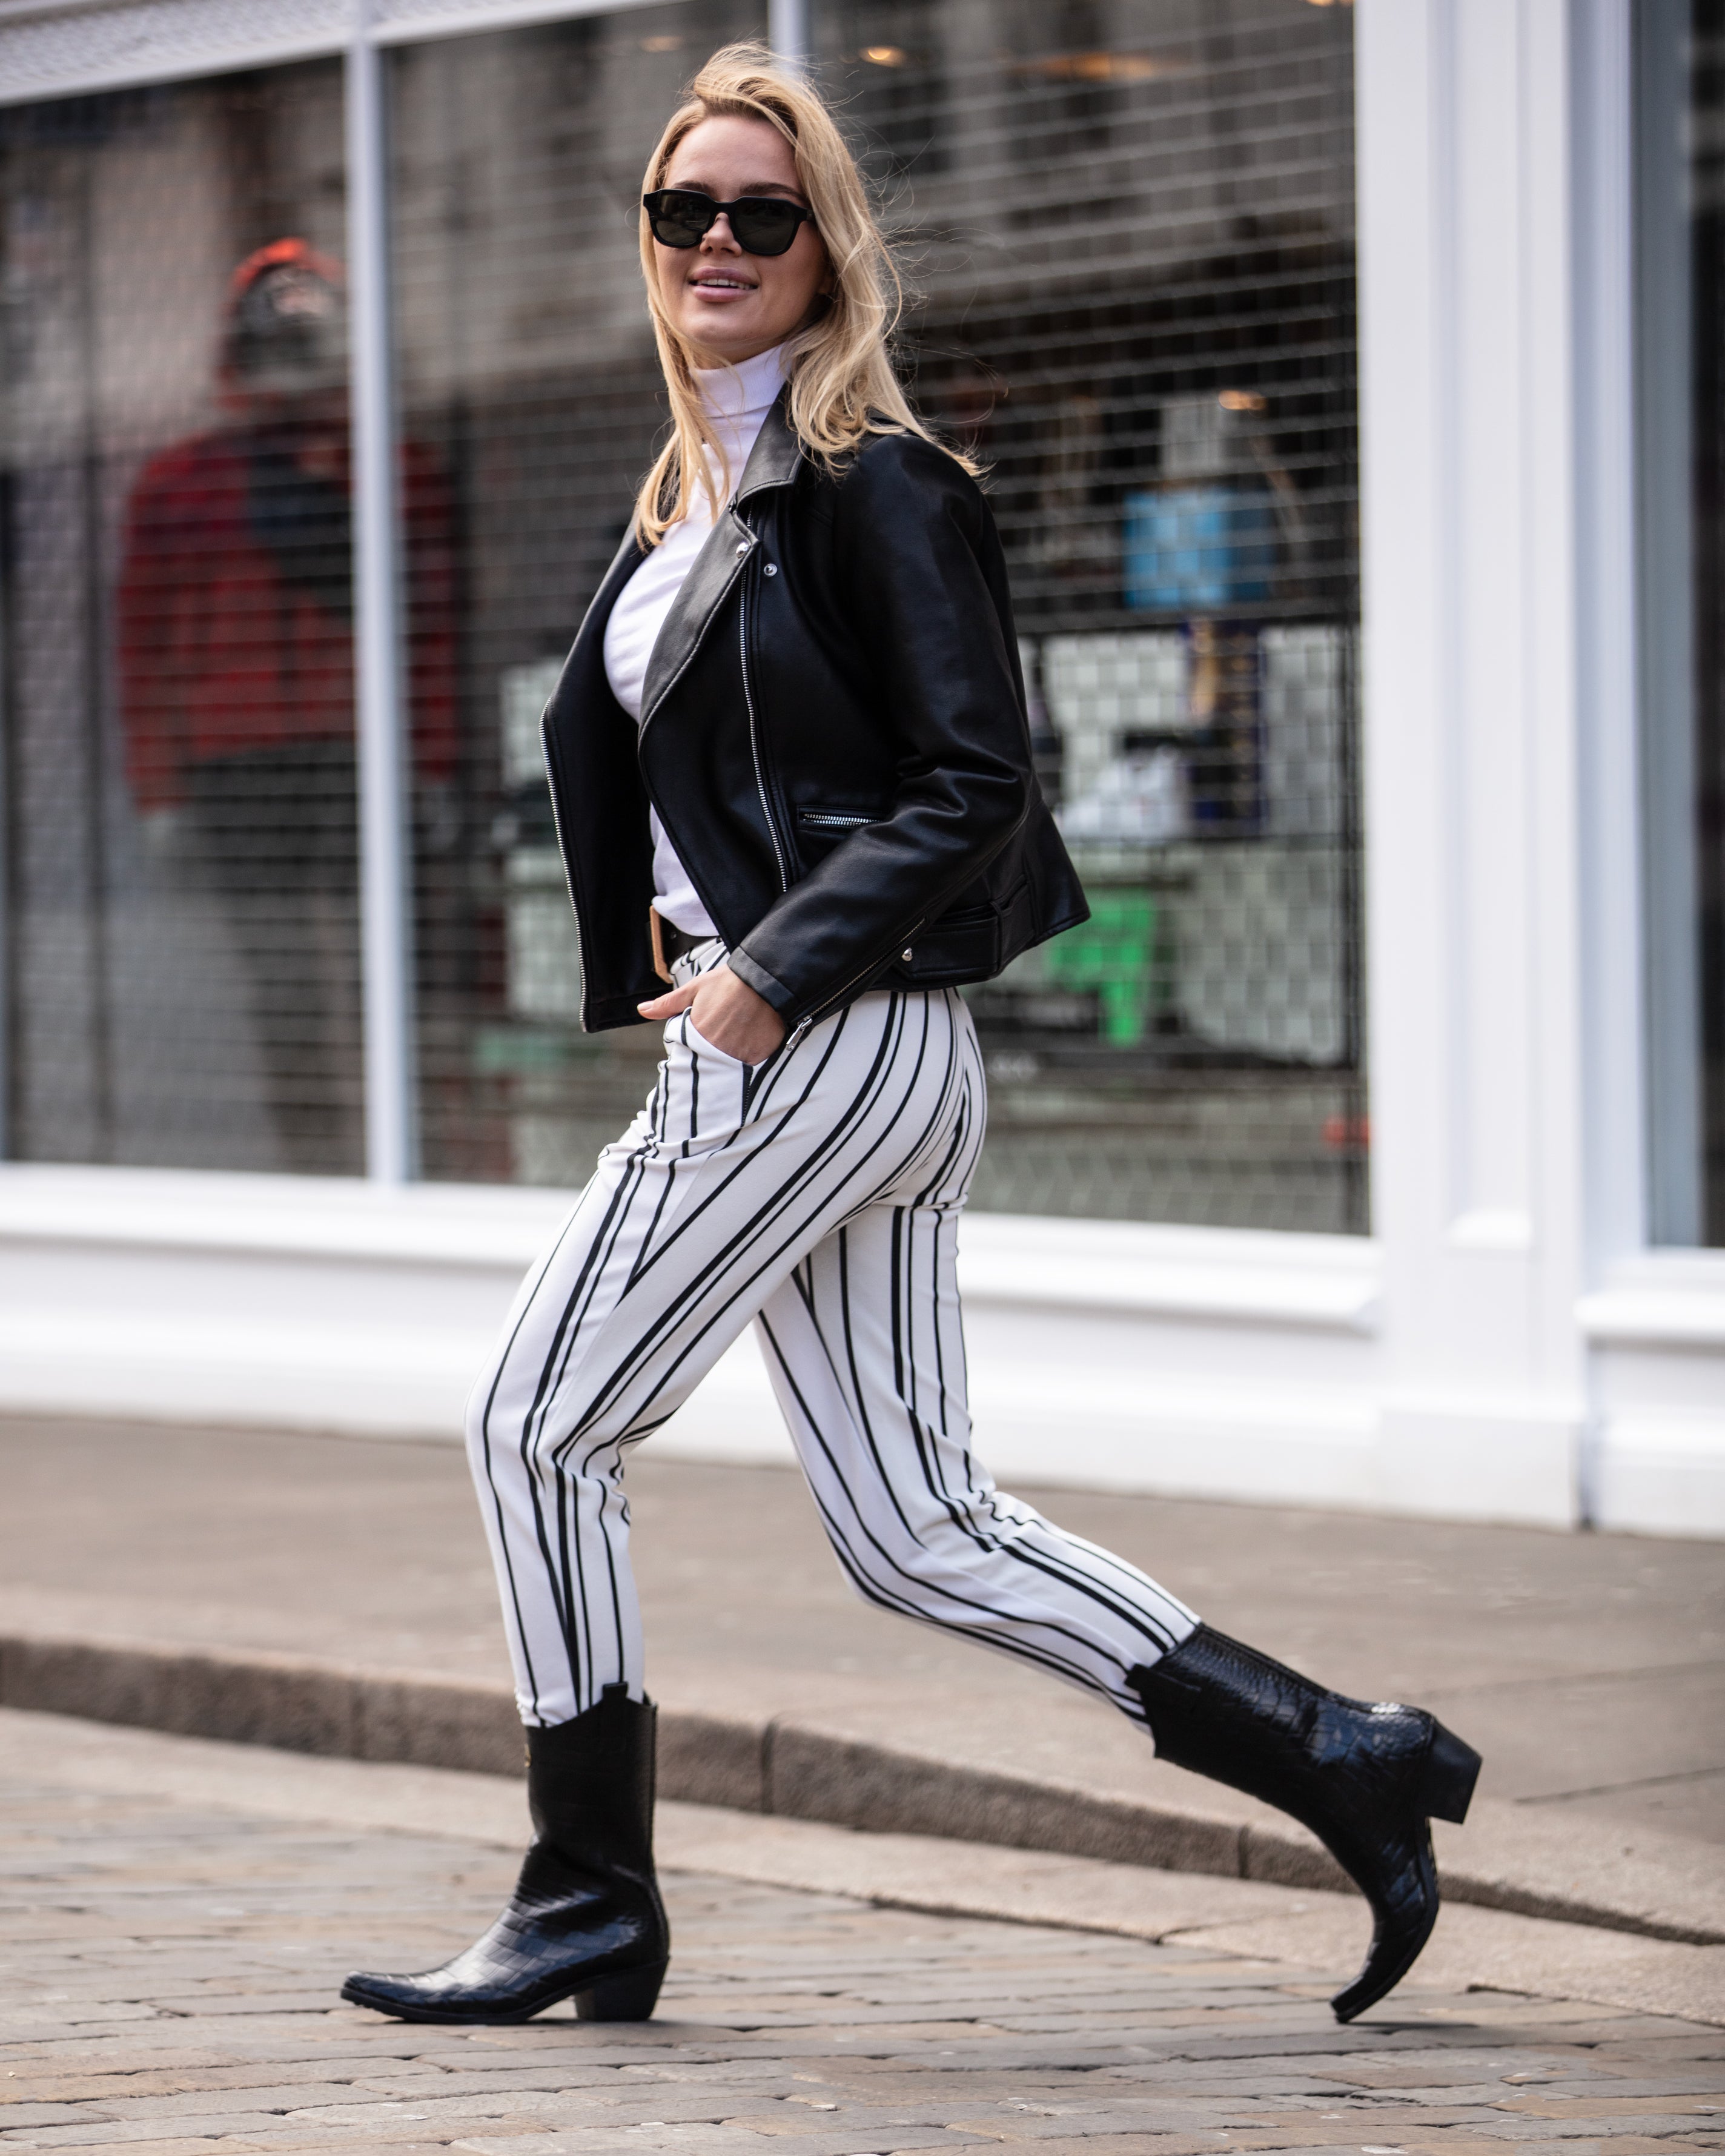 Girl striding across the road in black and whlte stripy trousers wearing Talolo mock croc black cowboy wellies